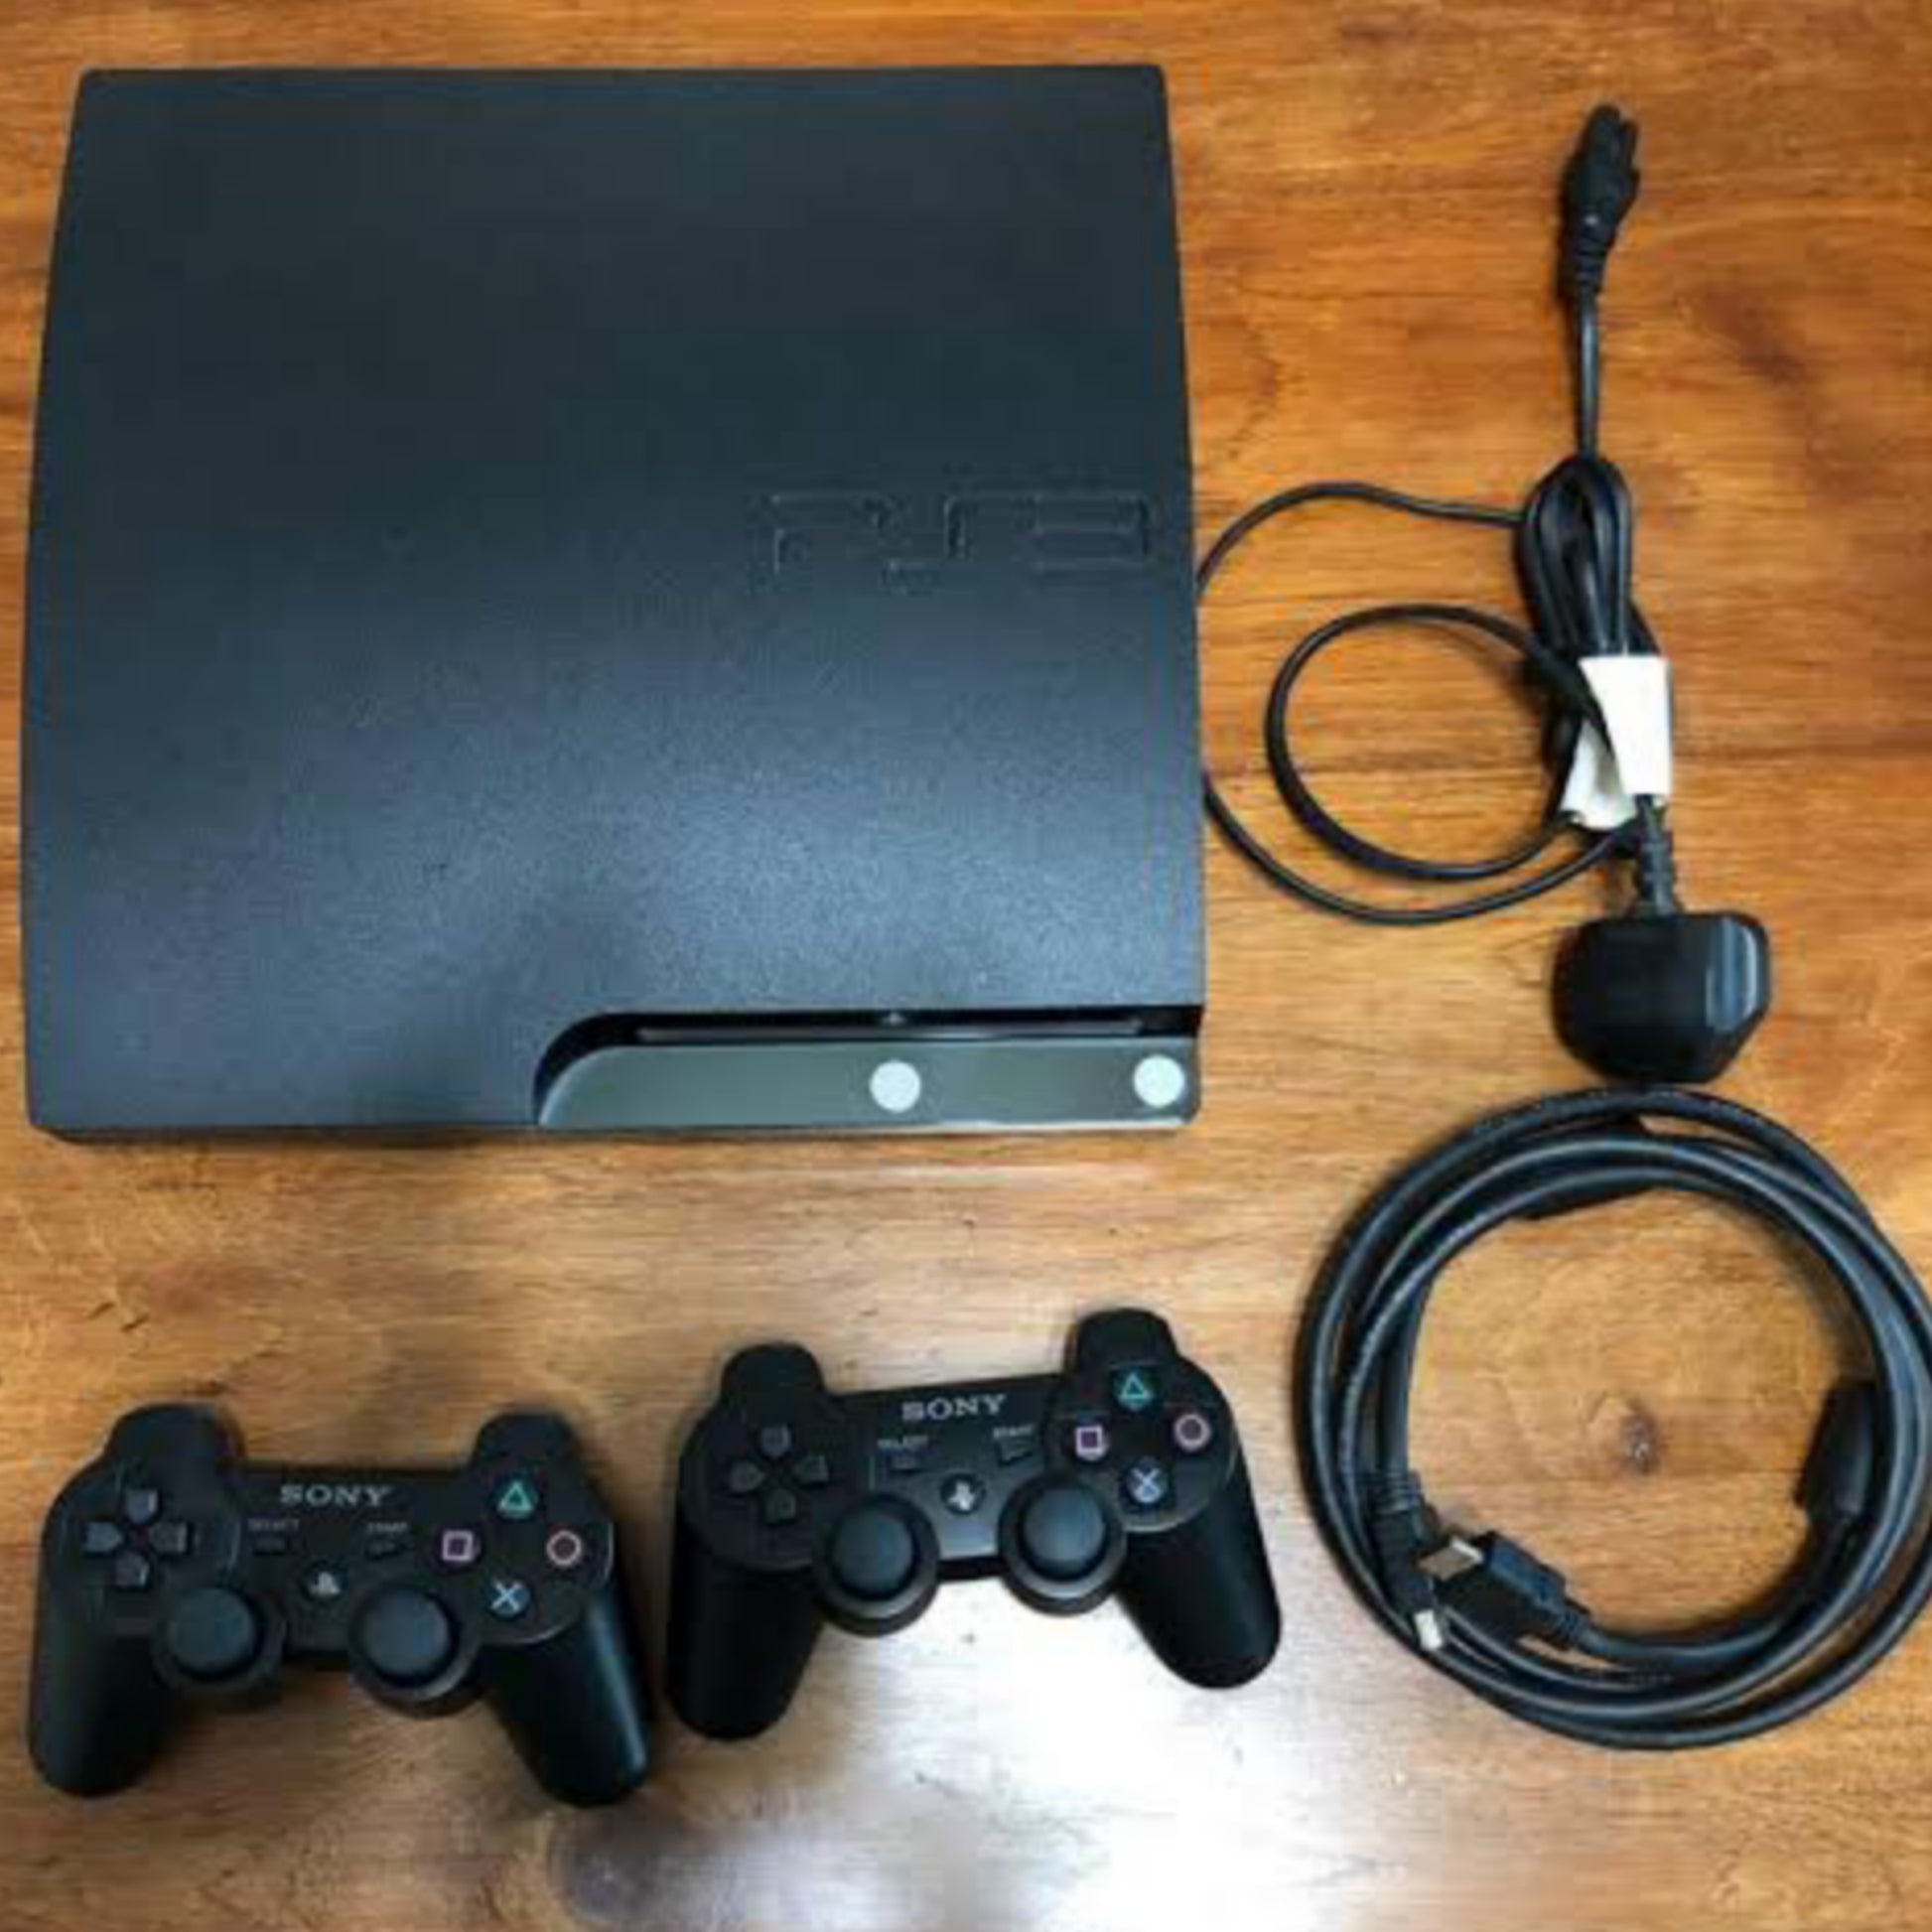 Sony Playstation 3 (PS3) Slim 320GB Game Console Complete Set with